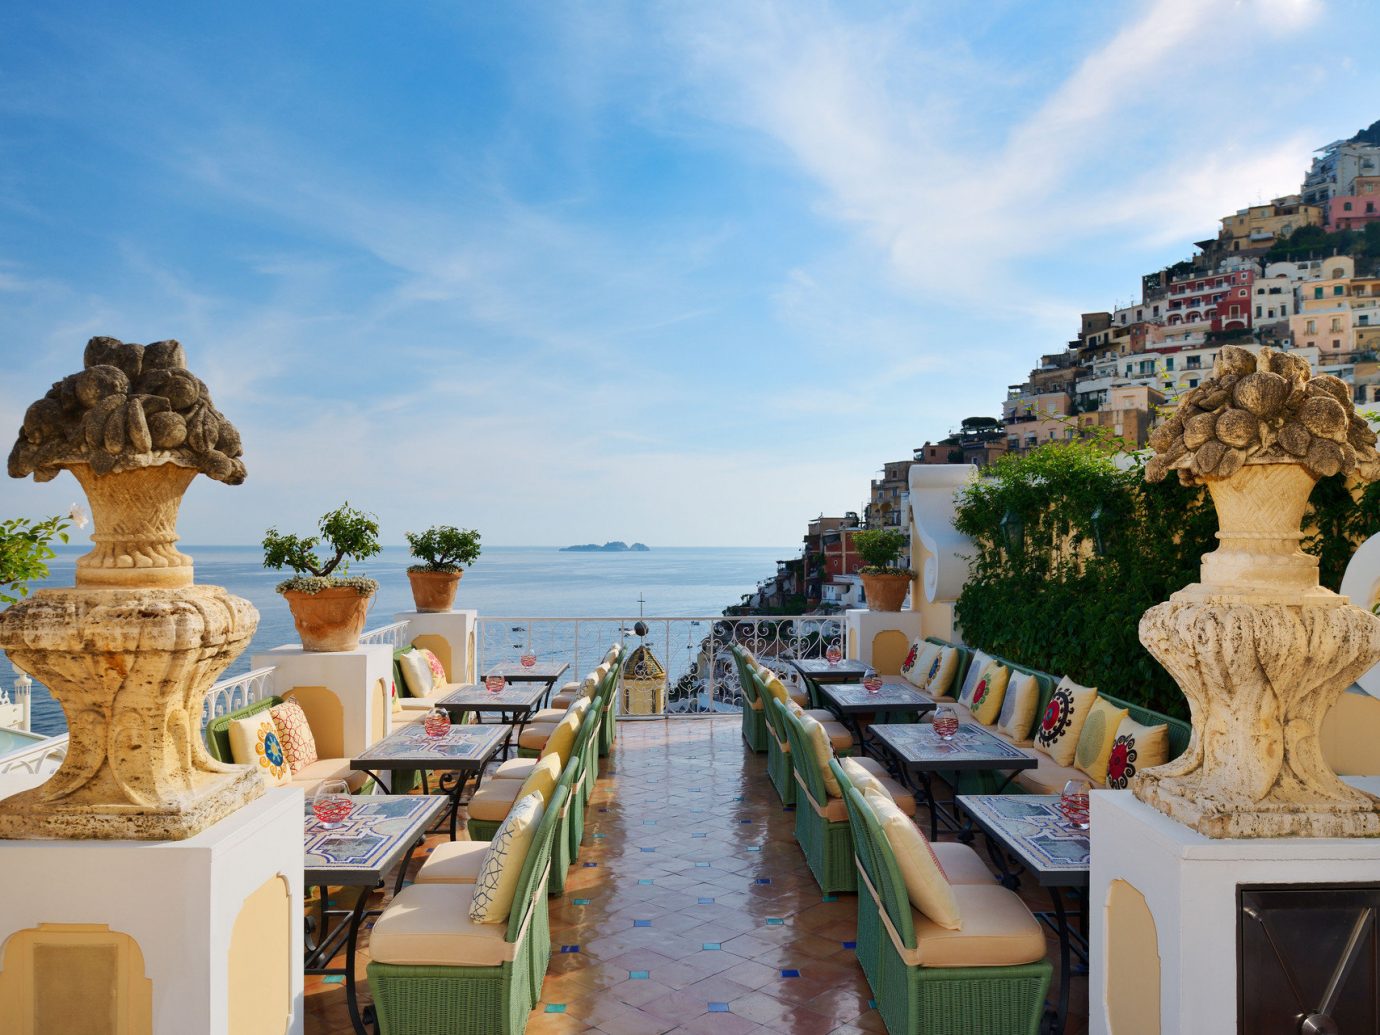 Buildings calm Cliffs Dining Elegant europe Hotels houses landscape Luxury Ocean ocean view outdoor dining overlook Patio regal remote serene sophisticated Terrace view sky outdoor vacation landmark tourism palace ancient history travel temple Resort Beach several